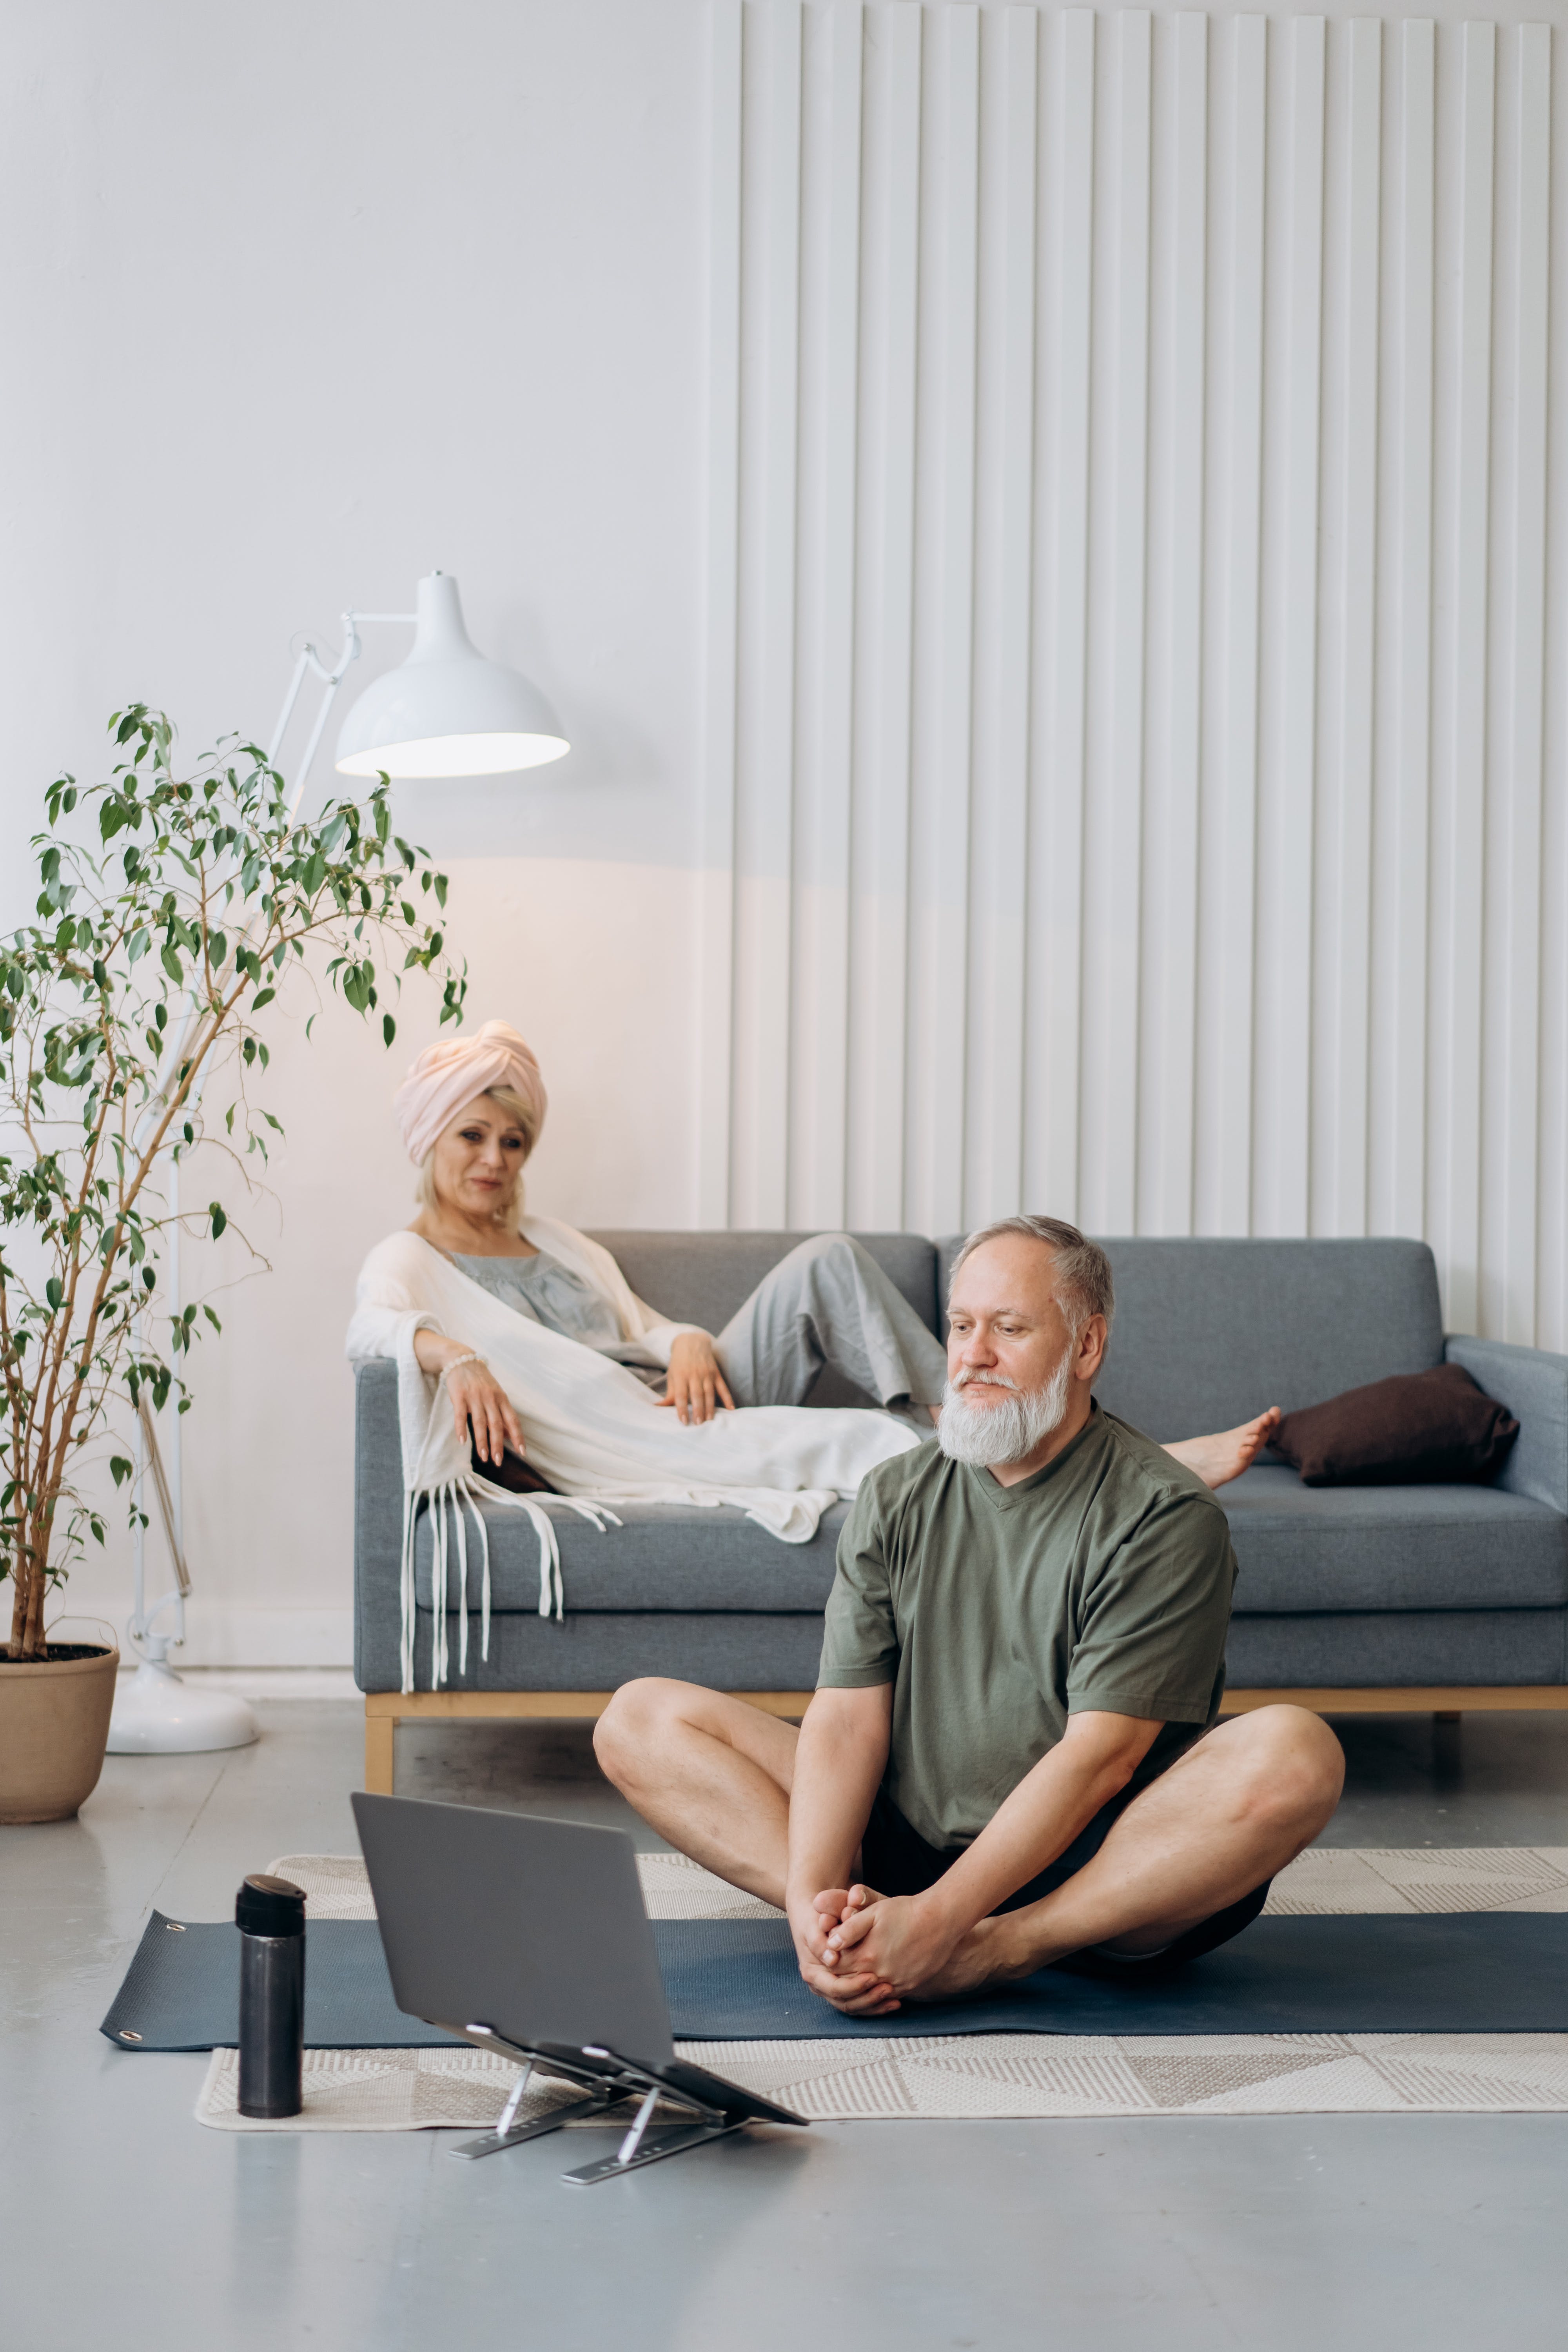 A woman sitting on the couch and a man sitting on the floor | Source: Pexels